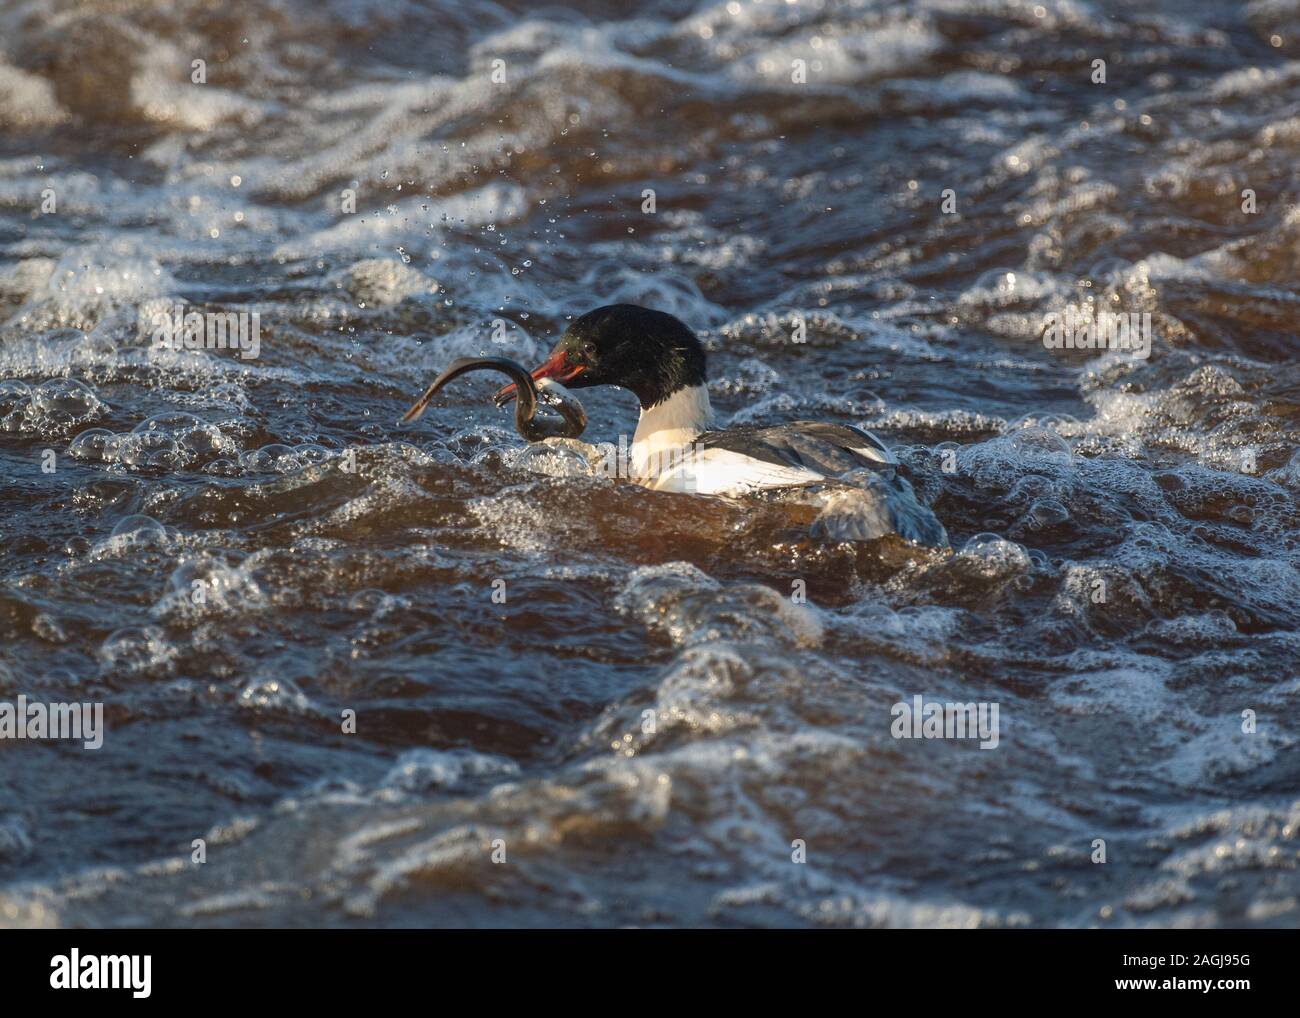 Goosander (Mergus merganser) fishing in turbulent waters of the River Nith, holding a lamprey in its bill, Dumfries, SW Scotland Stock Photo